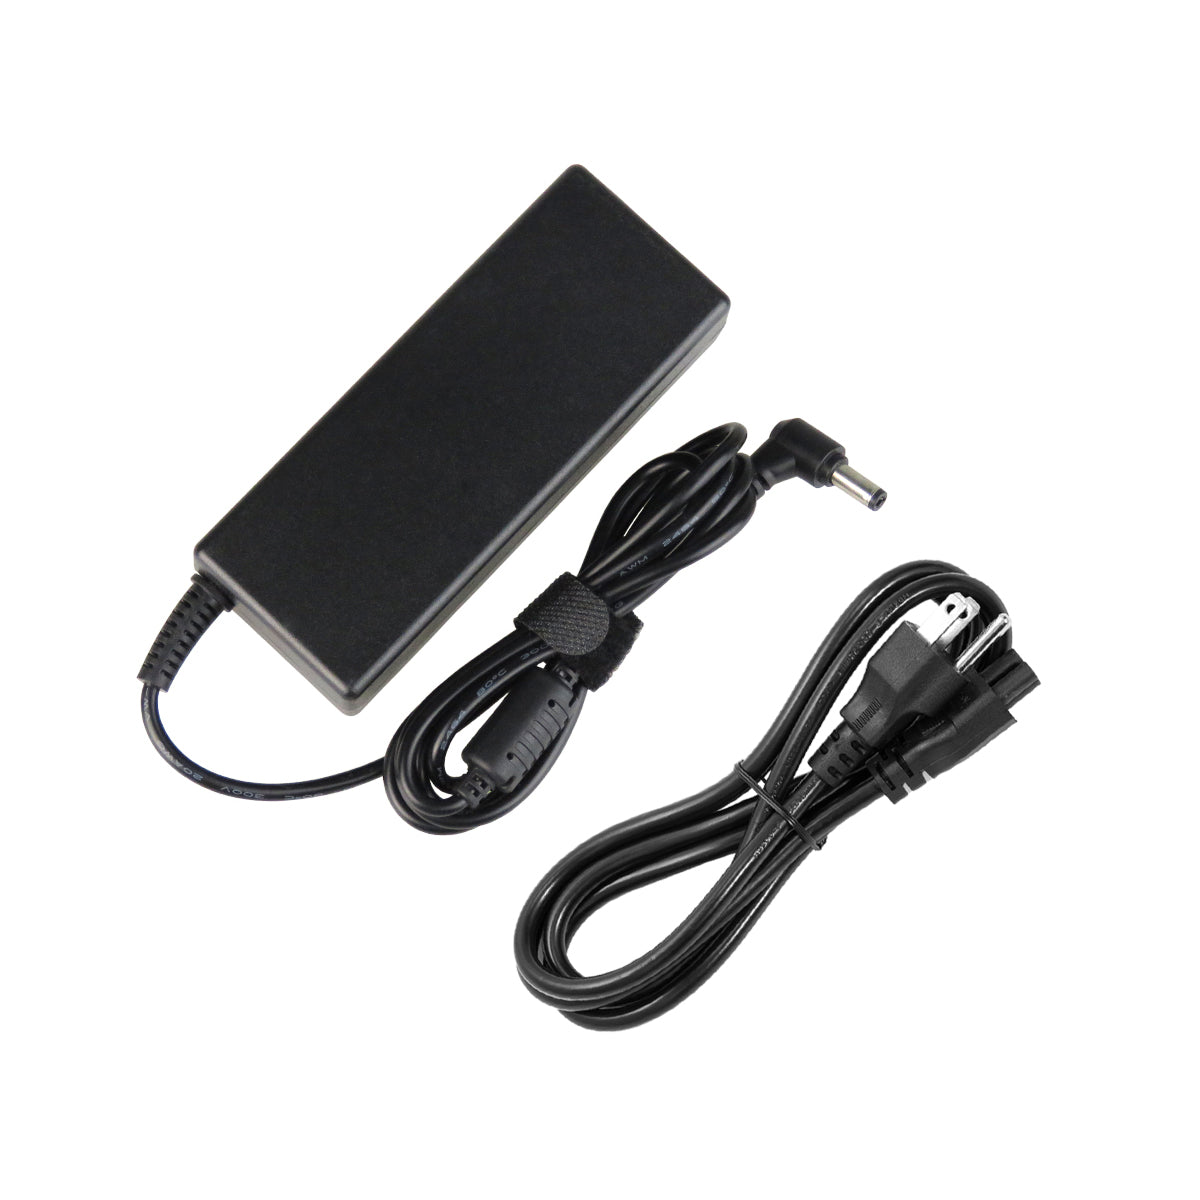 AC Adapter Charger for ASUS X52SA Notebook.